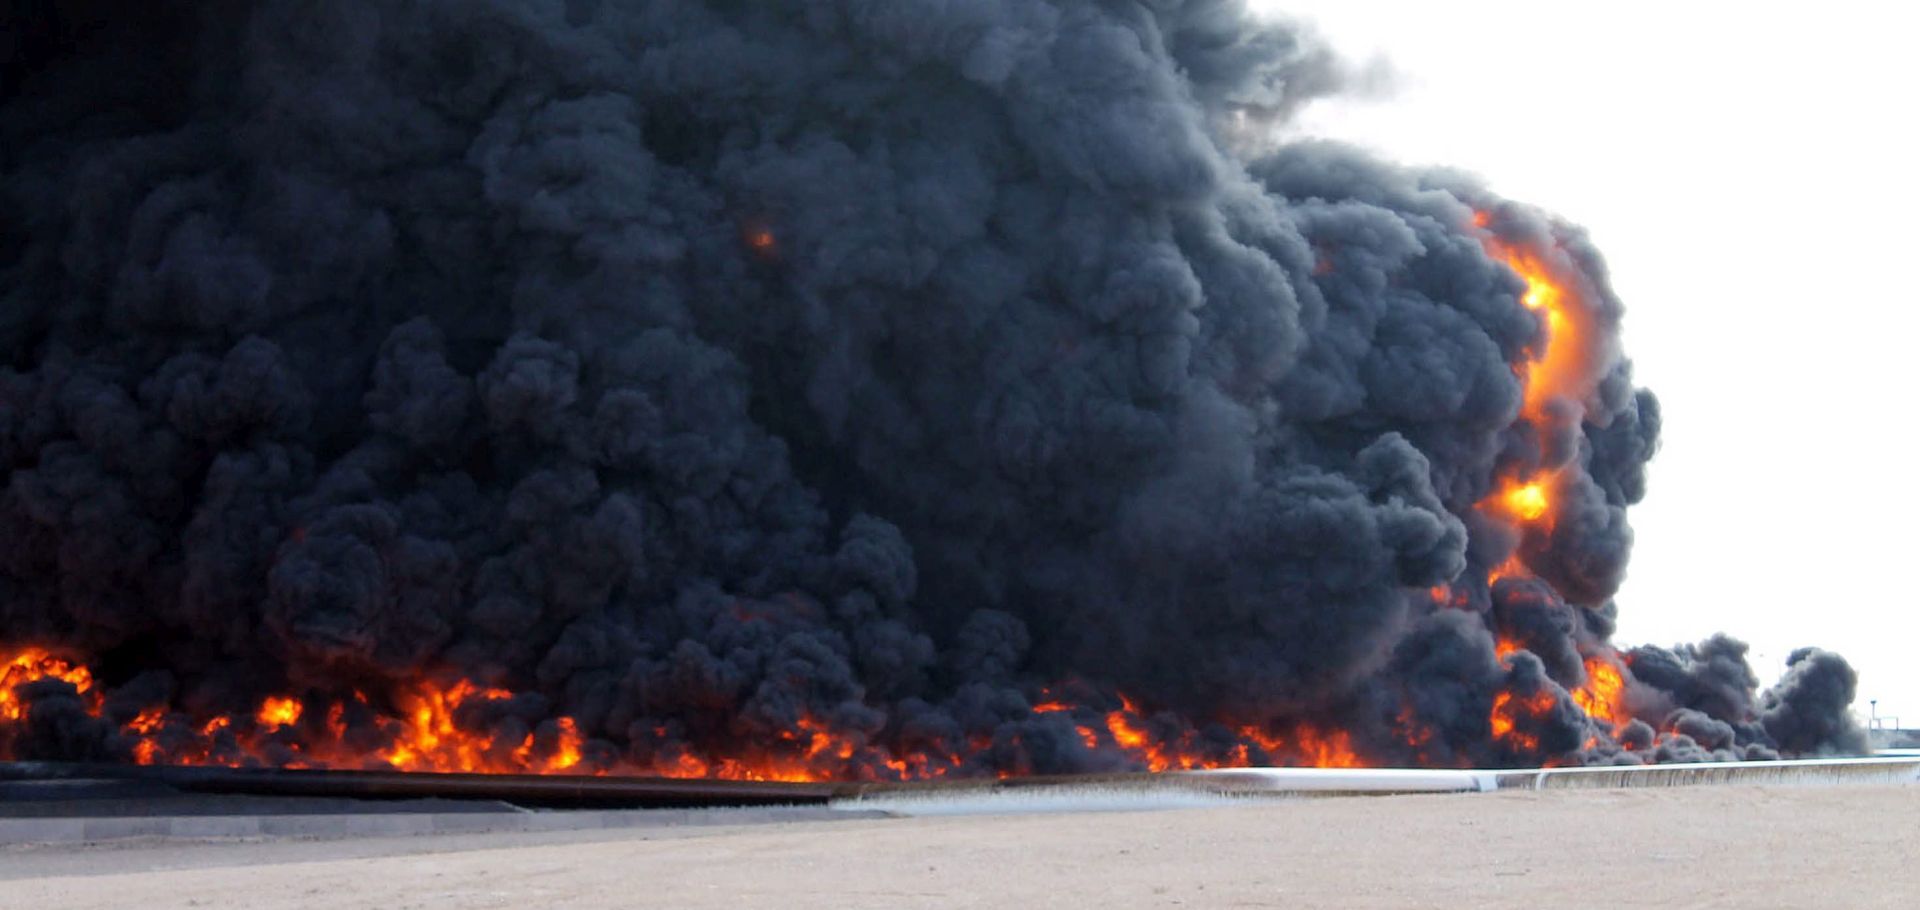 epa05087546 (FILE) A file picture dated 26 December 2014 showing smoke rising from a large fuel depot fire, al-Sidra, Libya, during  fighting. Islamic State militants on 04 January 2016 launched an attack on the port of al-Sidra, Libya's largest oil terminal, military officials said. Clashes between guards at the terminal and the jihadists led to the death of two guards and 10 of the attackers, Omar al-Hassi, spokesman for Libya's Petroleum Guards Force, said. A military official loyal to Libya's internationally recognized government, based in Tobruk in the far east of the country, said the air force had intervened and rebuffed the attack.
Islamic State, which is based mainly in Syria and Iraq, controls an area of Libya's Mediterranean coast centred around the towns of Sirte and al-Nofaliyeh, west of al-Sidra.  EPA/STRINGER